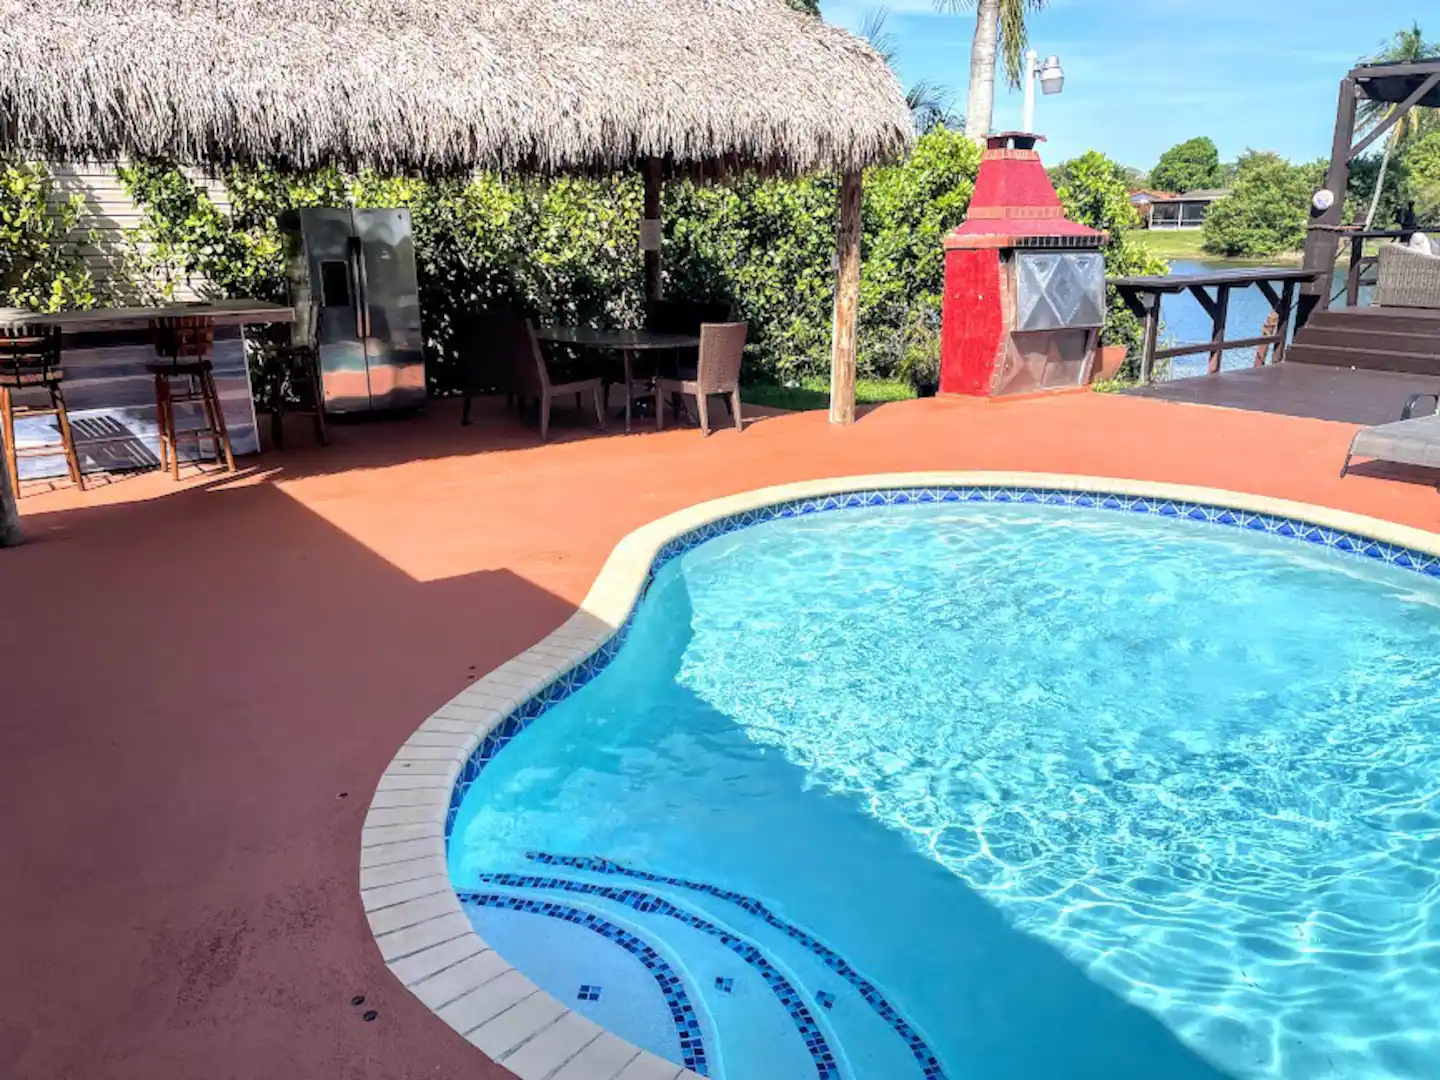 Heated pool patio, Tiki with bar, Outside Fridge, Dinning table and Large Argentinian BBQ with wooden counter, and Deck over the Lake.